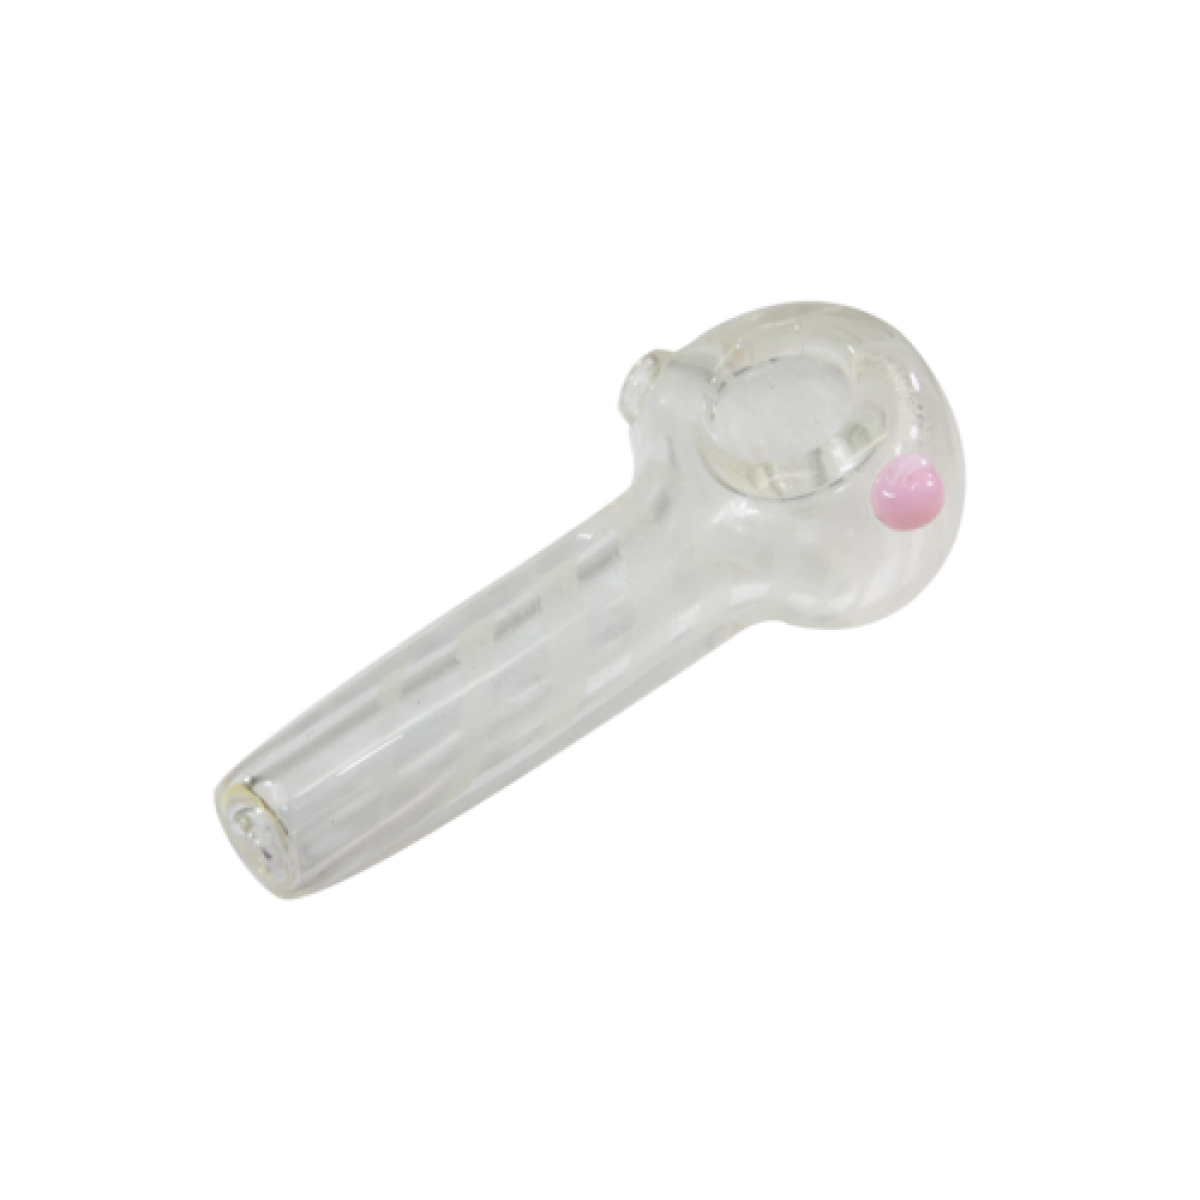 4 in. Glow in the Dark Glass Handpipe with Spiral